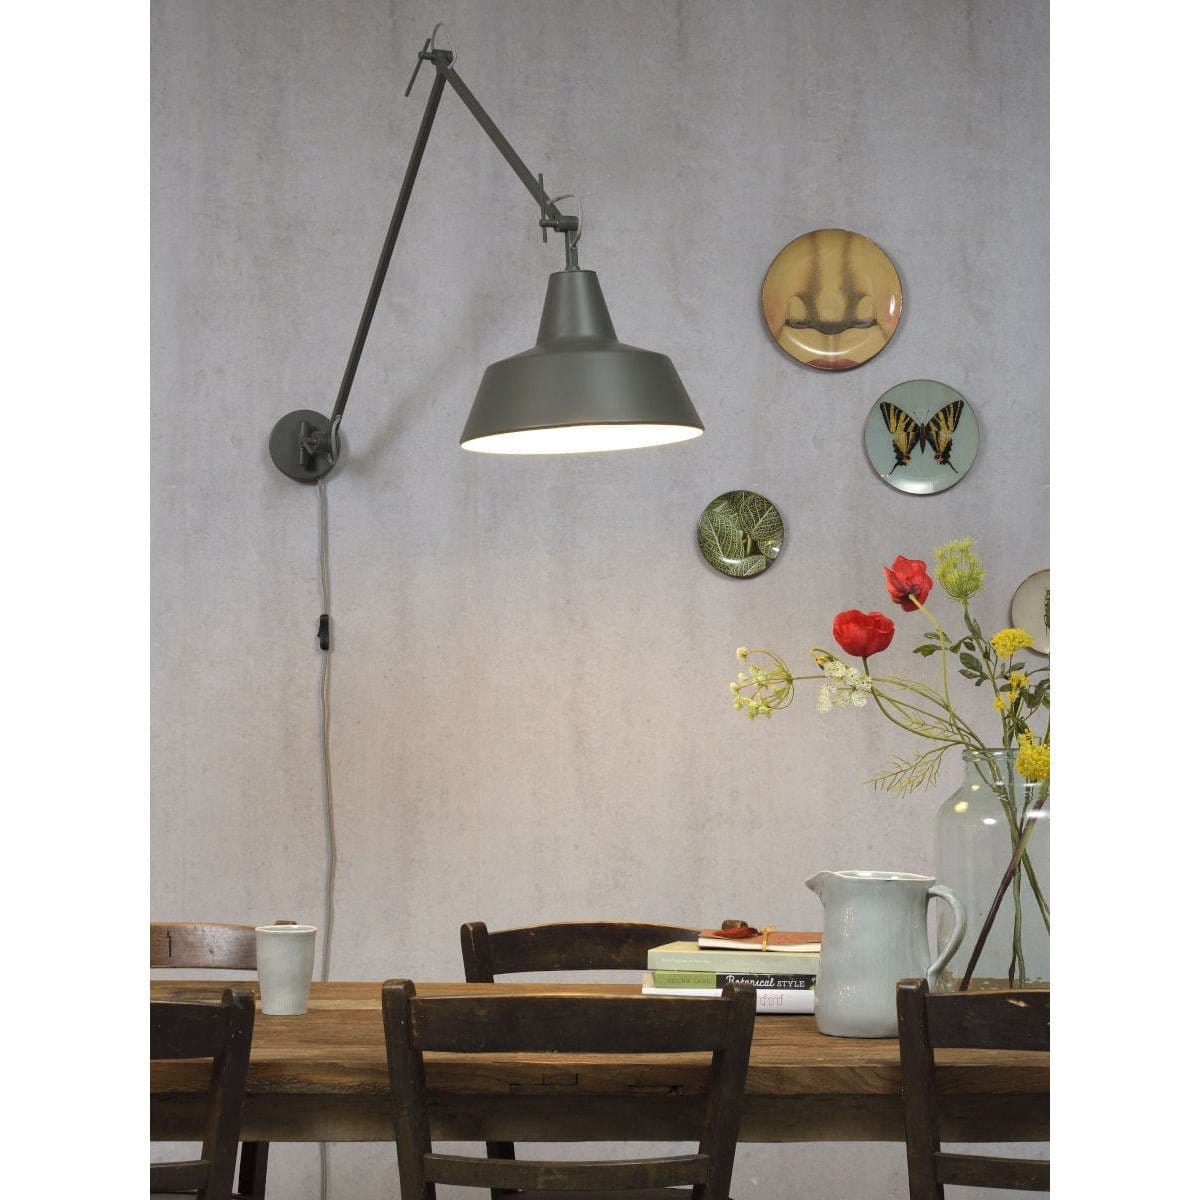 It's About RoMi Wall Lights Grey Green Chicago Wall Light, black, grey green or white